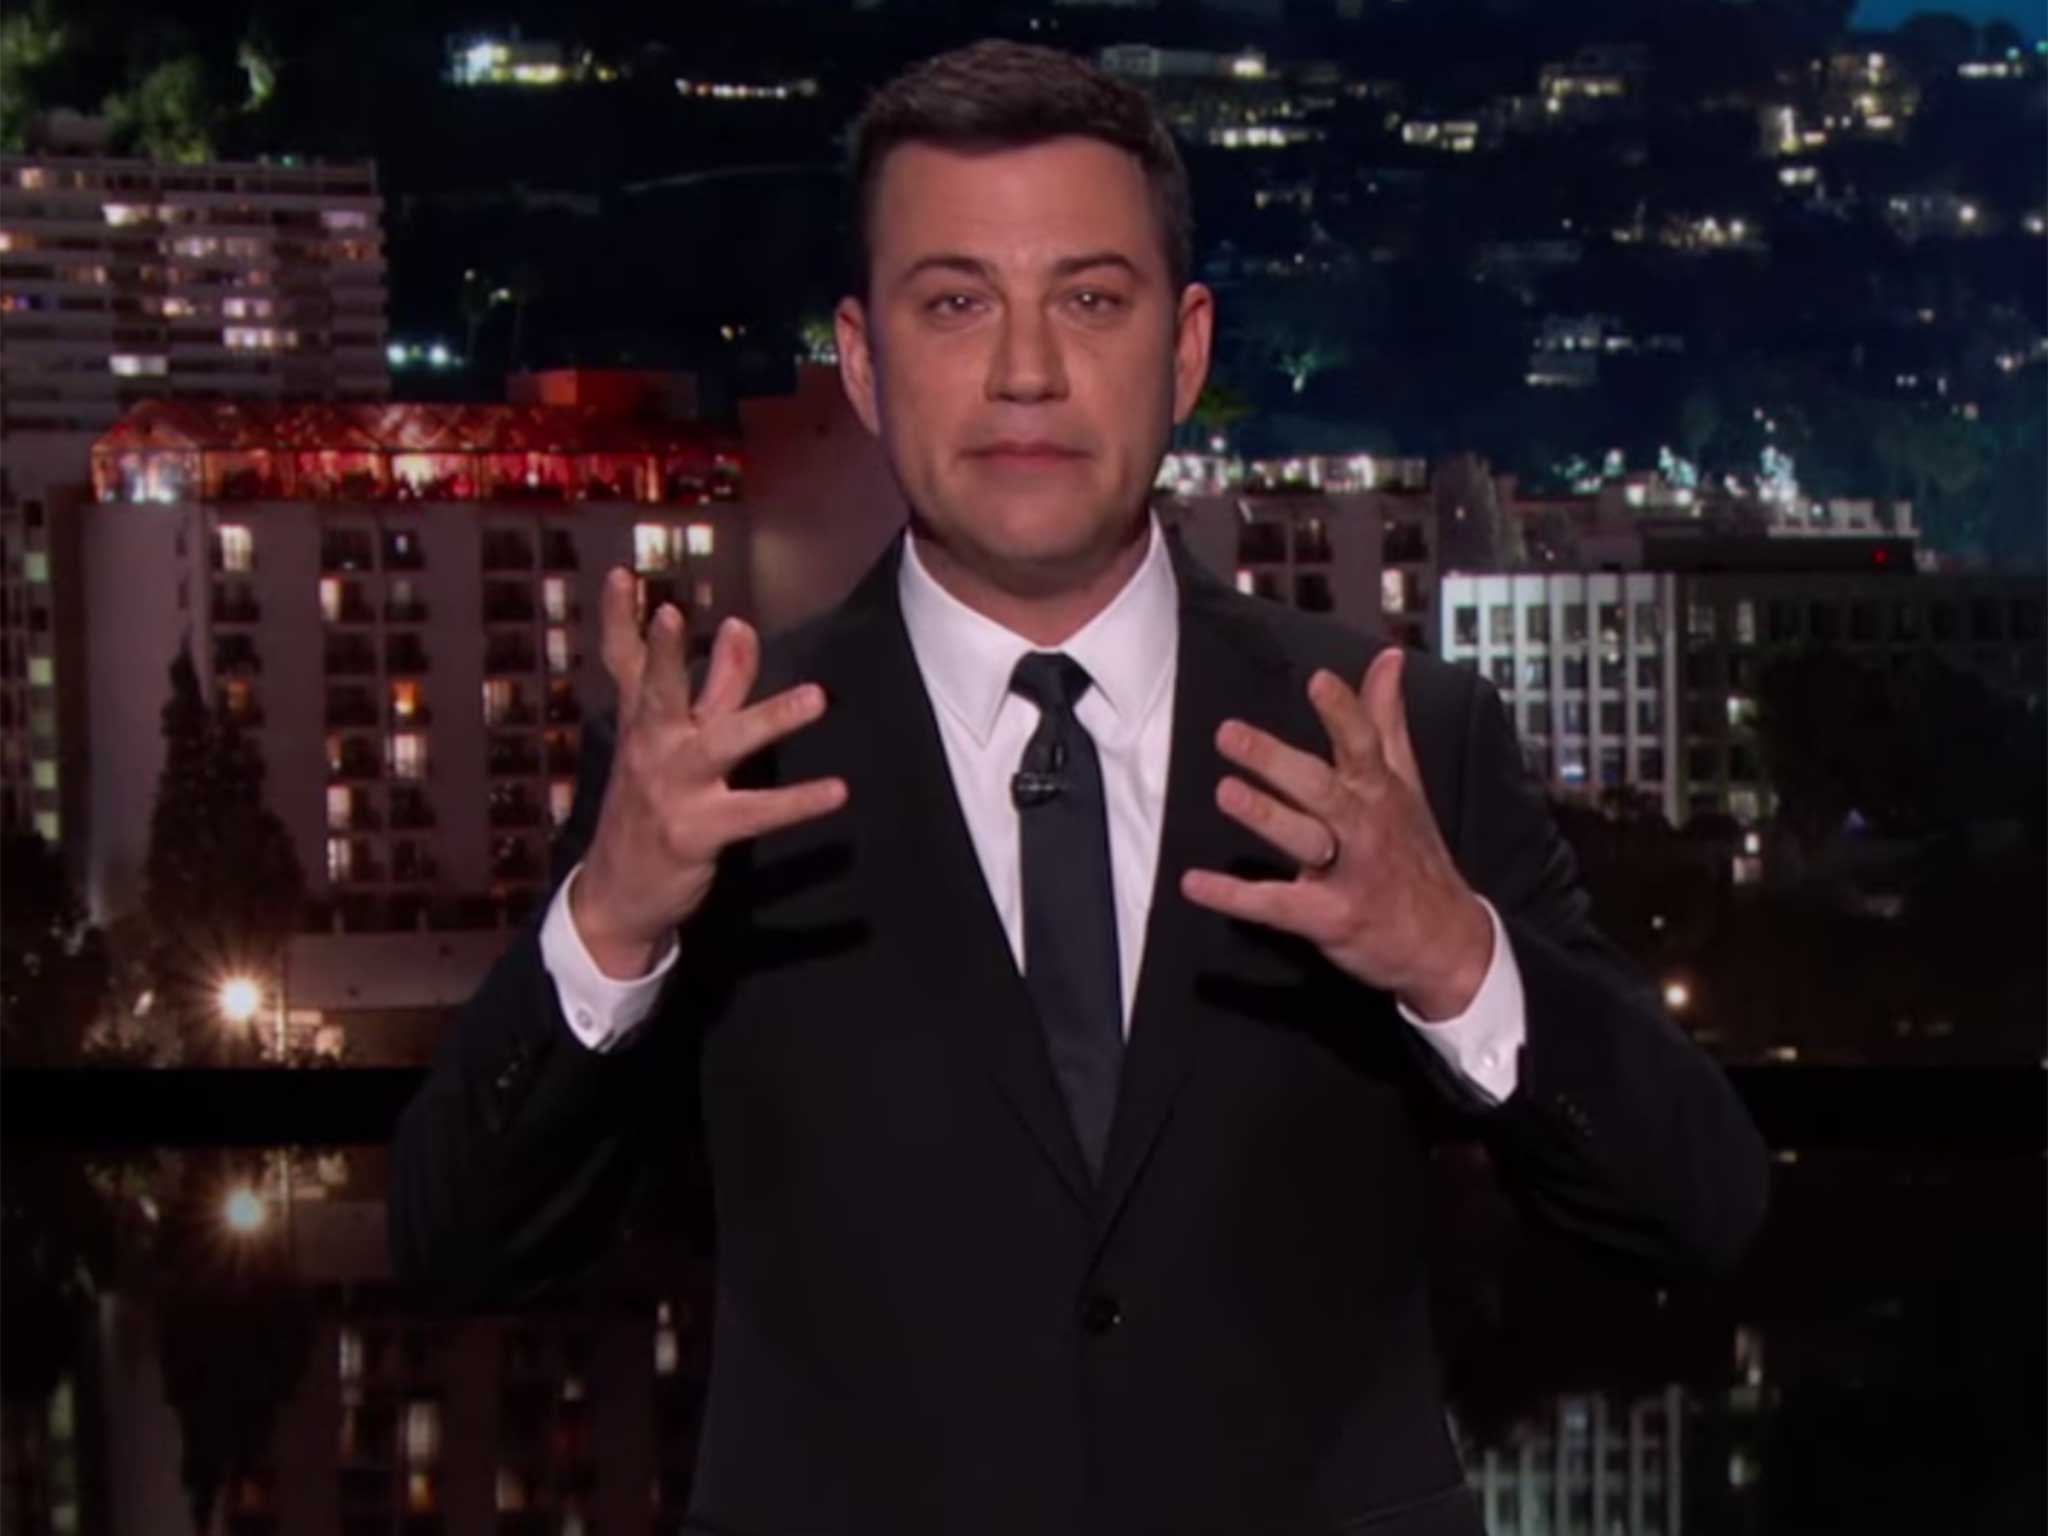 Kimmel breaks down during his show over Cecil the Lion